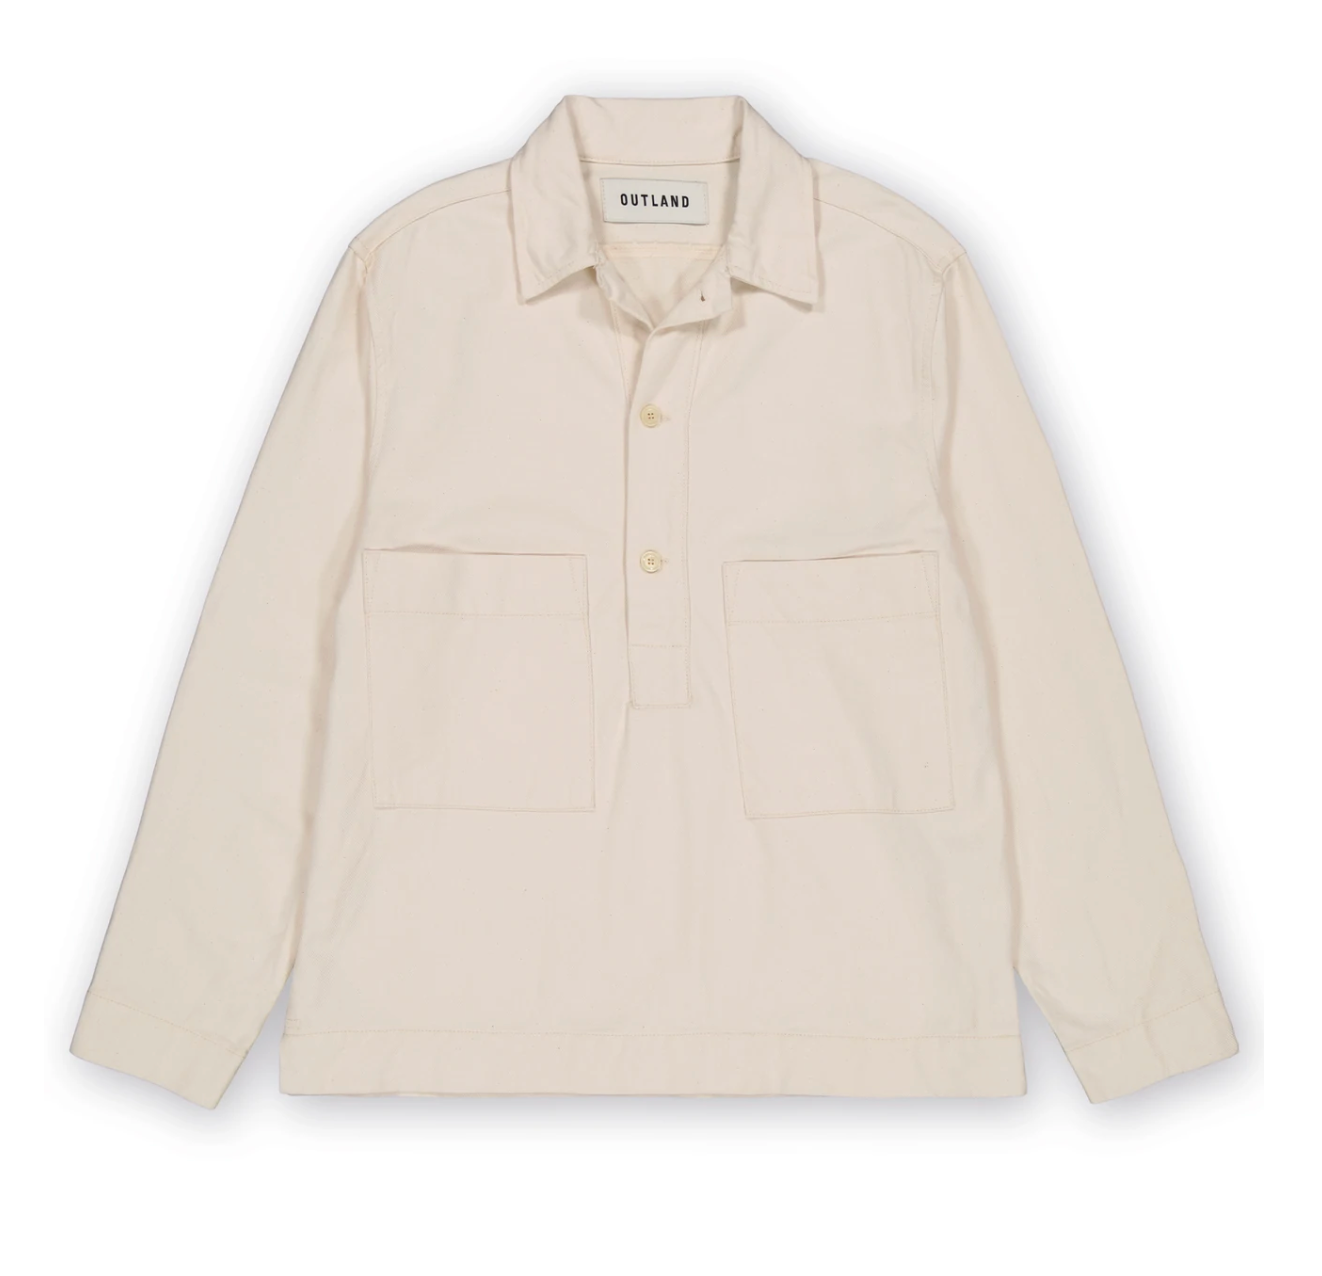 Outland Wear France Painter Overshirt , Overshirts, Outland, Working Title